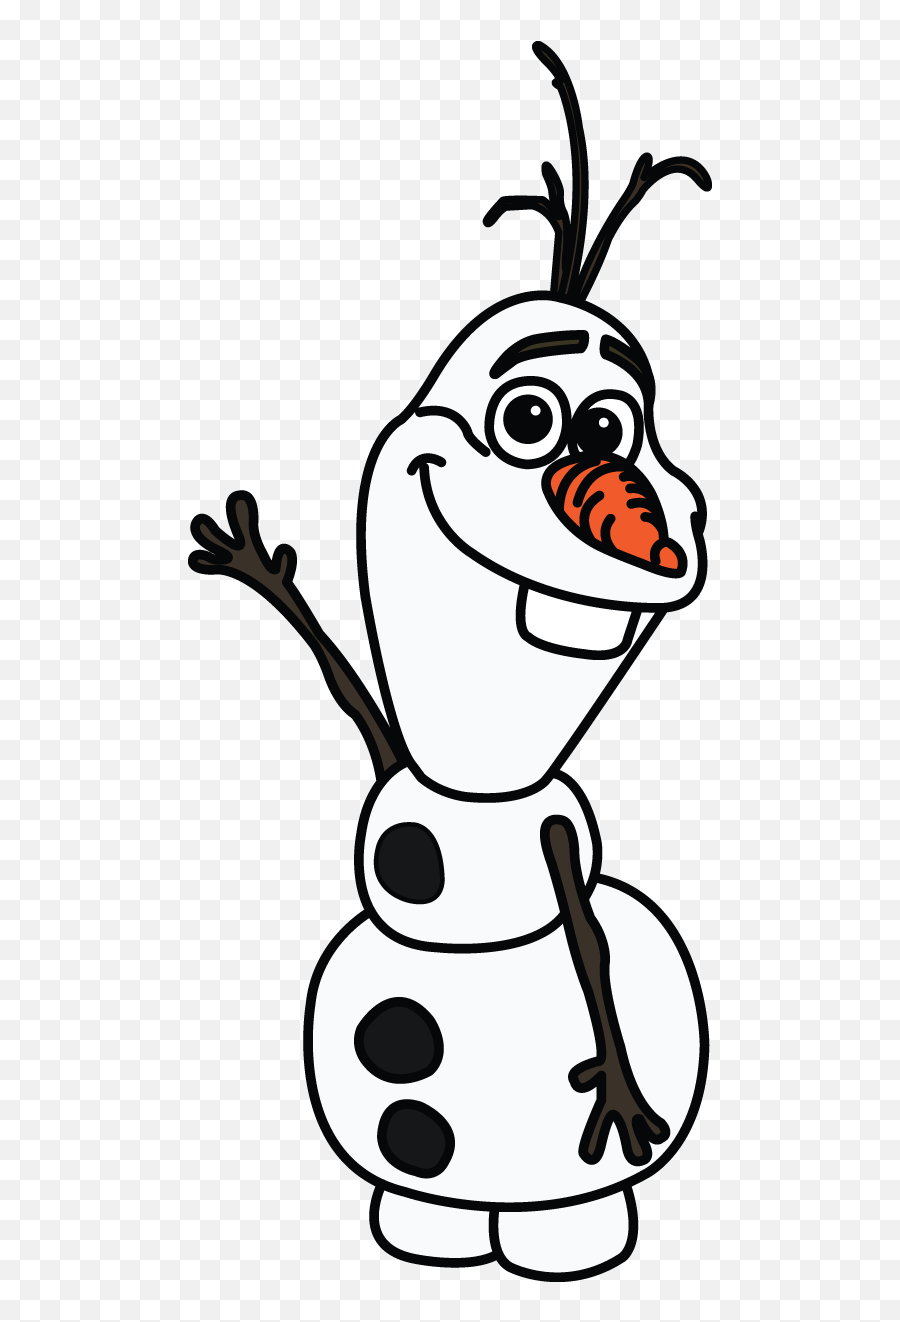 Olaf In Black And White Clipart - Olaf Snowman Clipart Black And White Emoji,Olaf Clipart